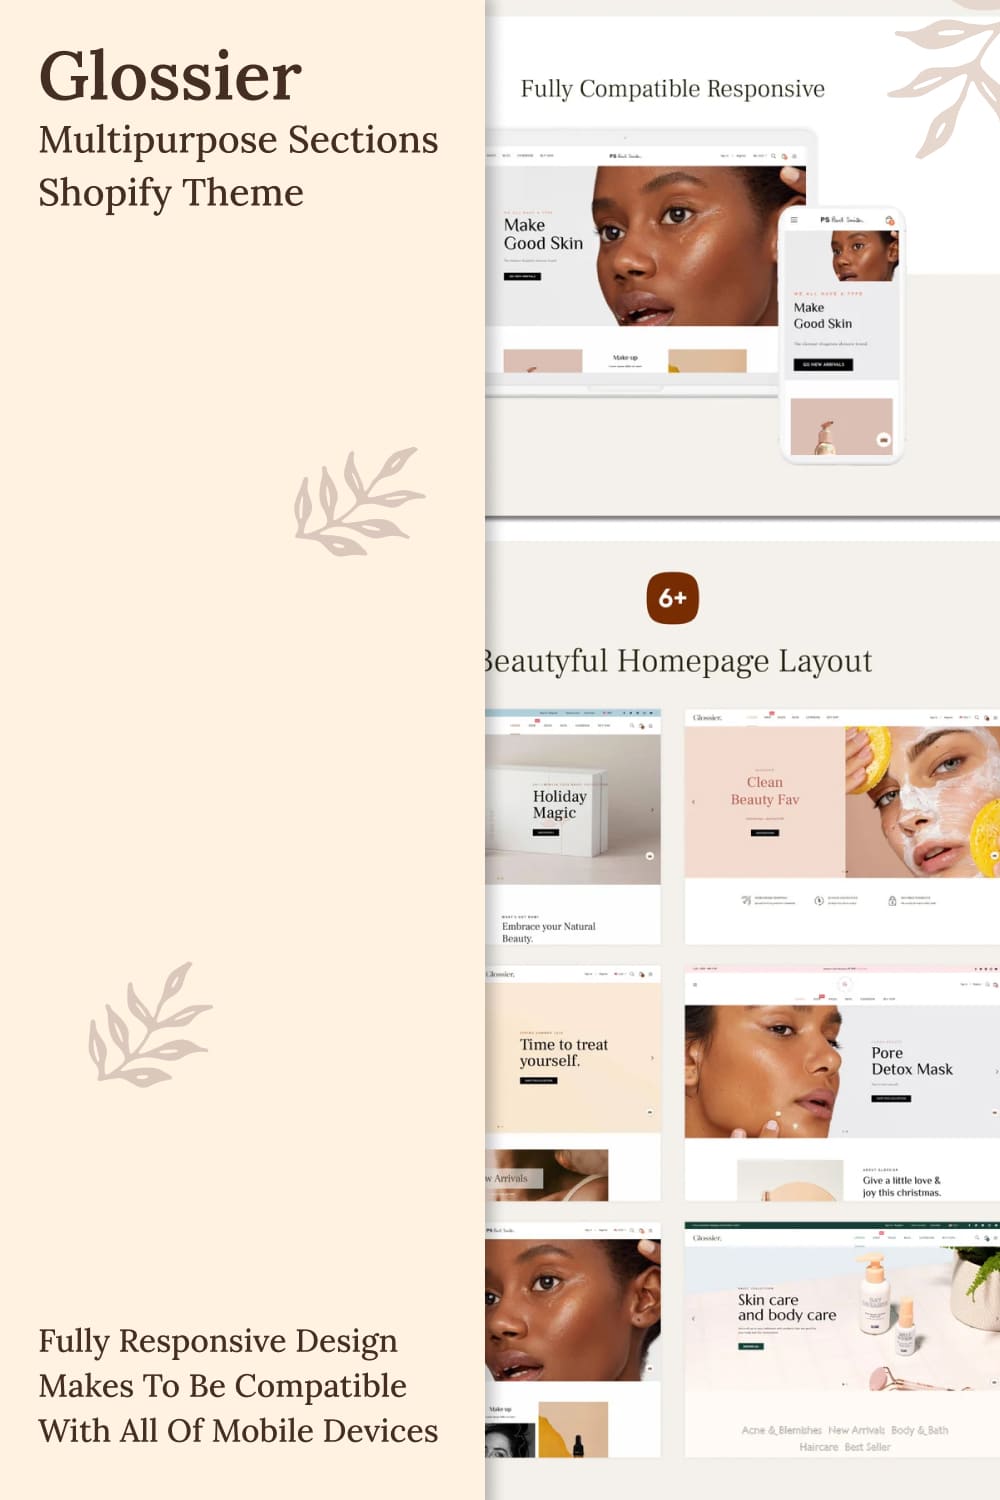 Glossier multipurpose sections shopify theme, picture for pinterest 1000x1500.